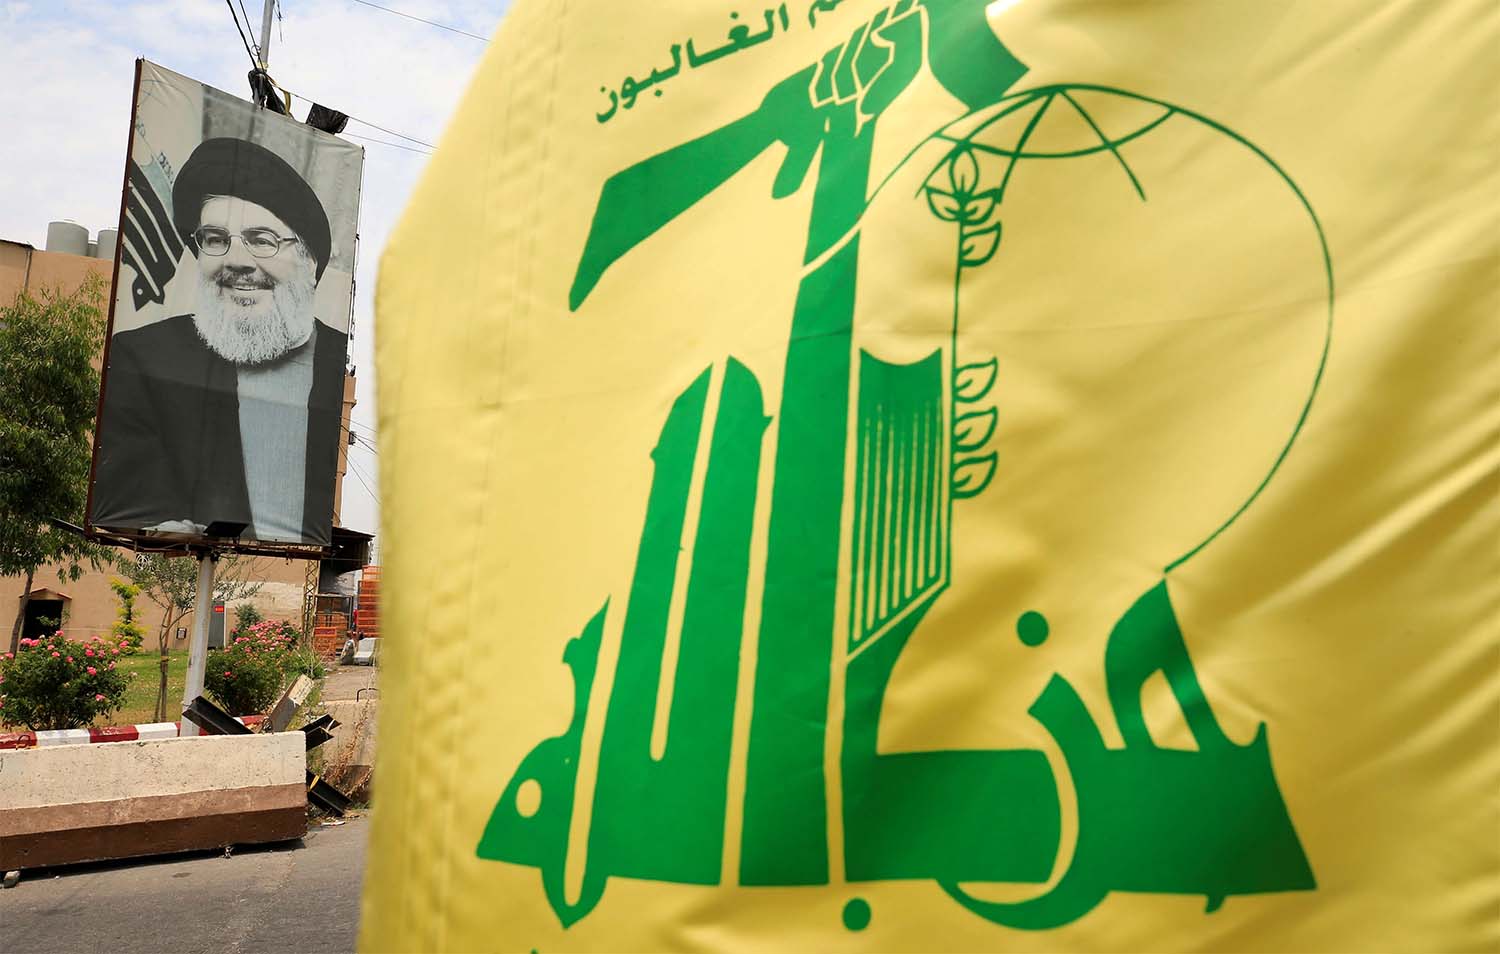 Including all Hezbollah entities as terrorist organizations would make being a member of or supporting those entities a criminal offense in Australia